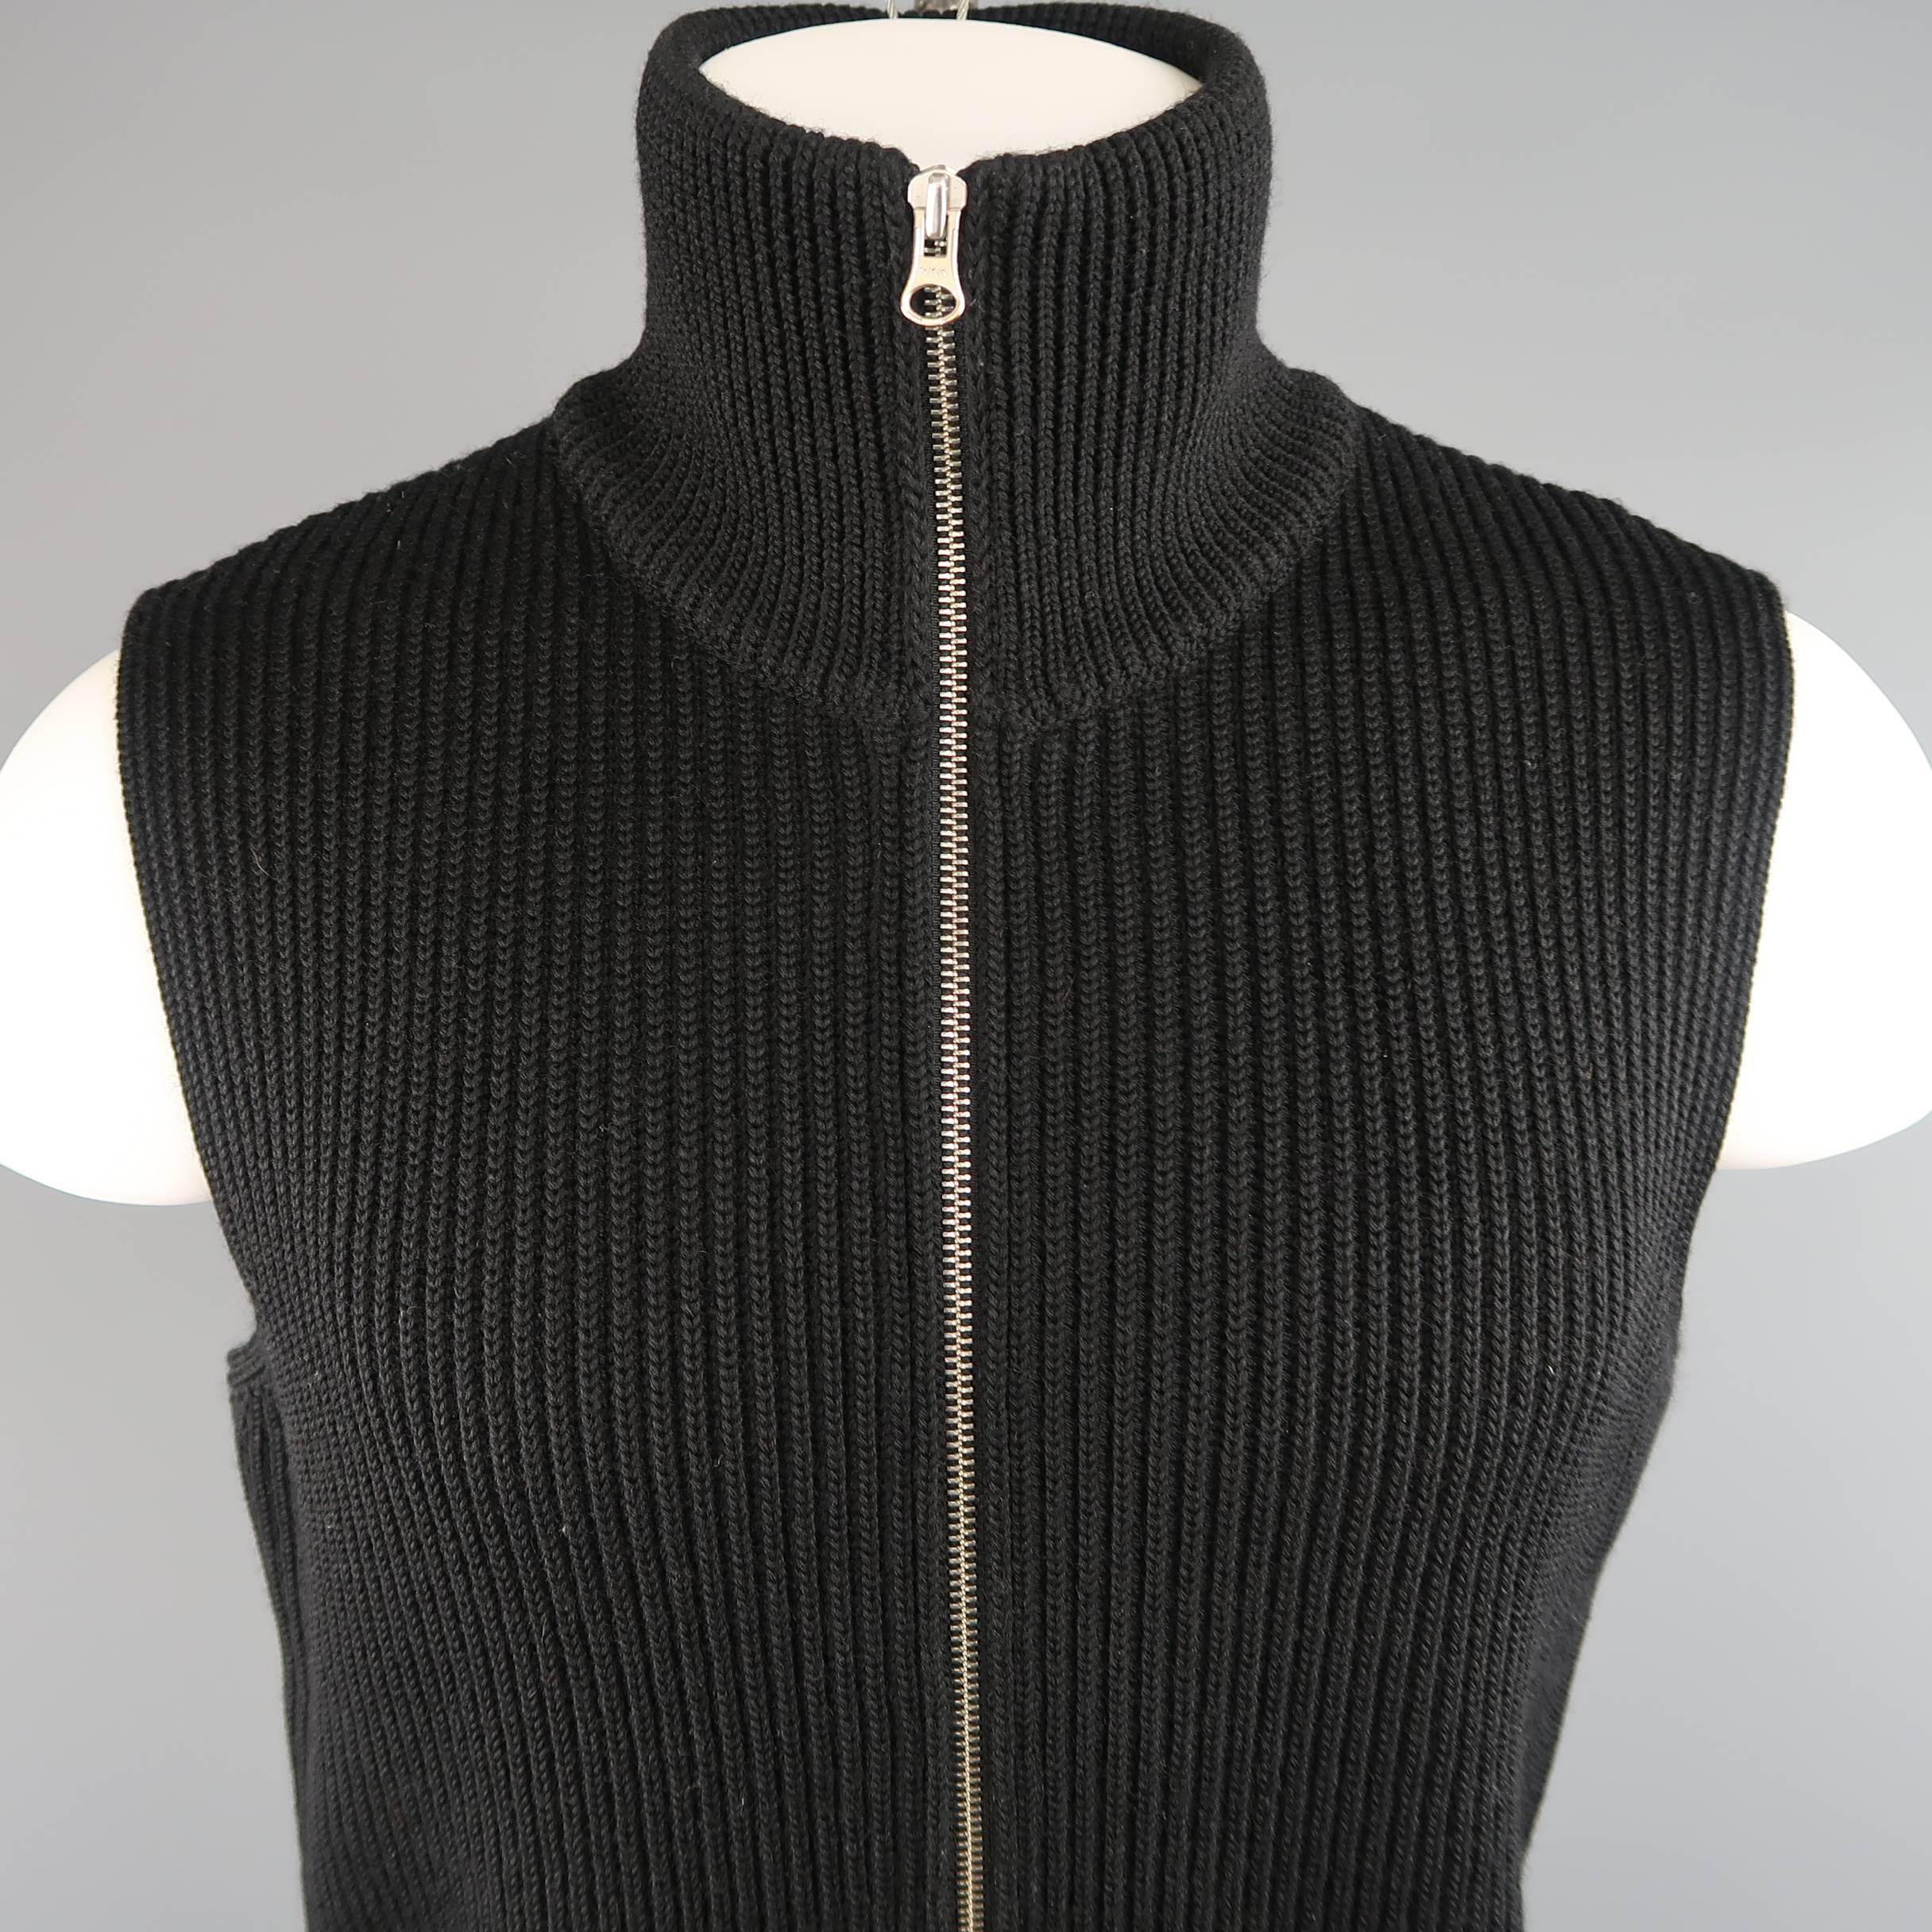 MAISON MARTIN MARGIELA sweater vest comes in a wool thick ribbed knit and features a high neck, zip front, and white stitched on back. Made in Italy.
 
Excellent Pre-Owned Condition.
Marked: M
 
Measurements:
 
Shoulder: 17 in.
Chest: 42 in.
Length: